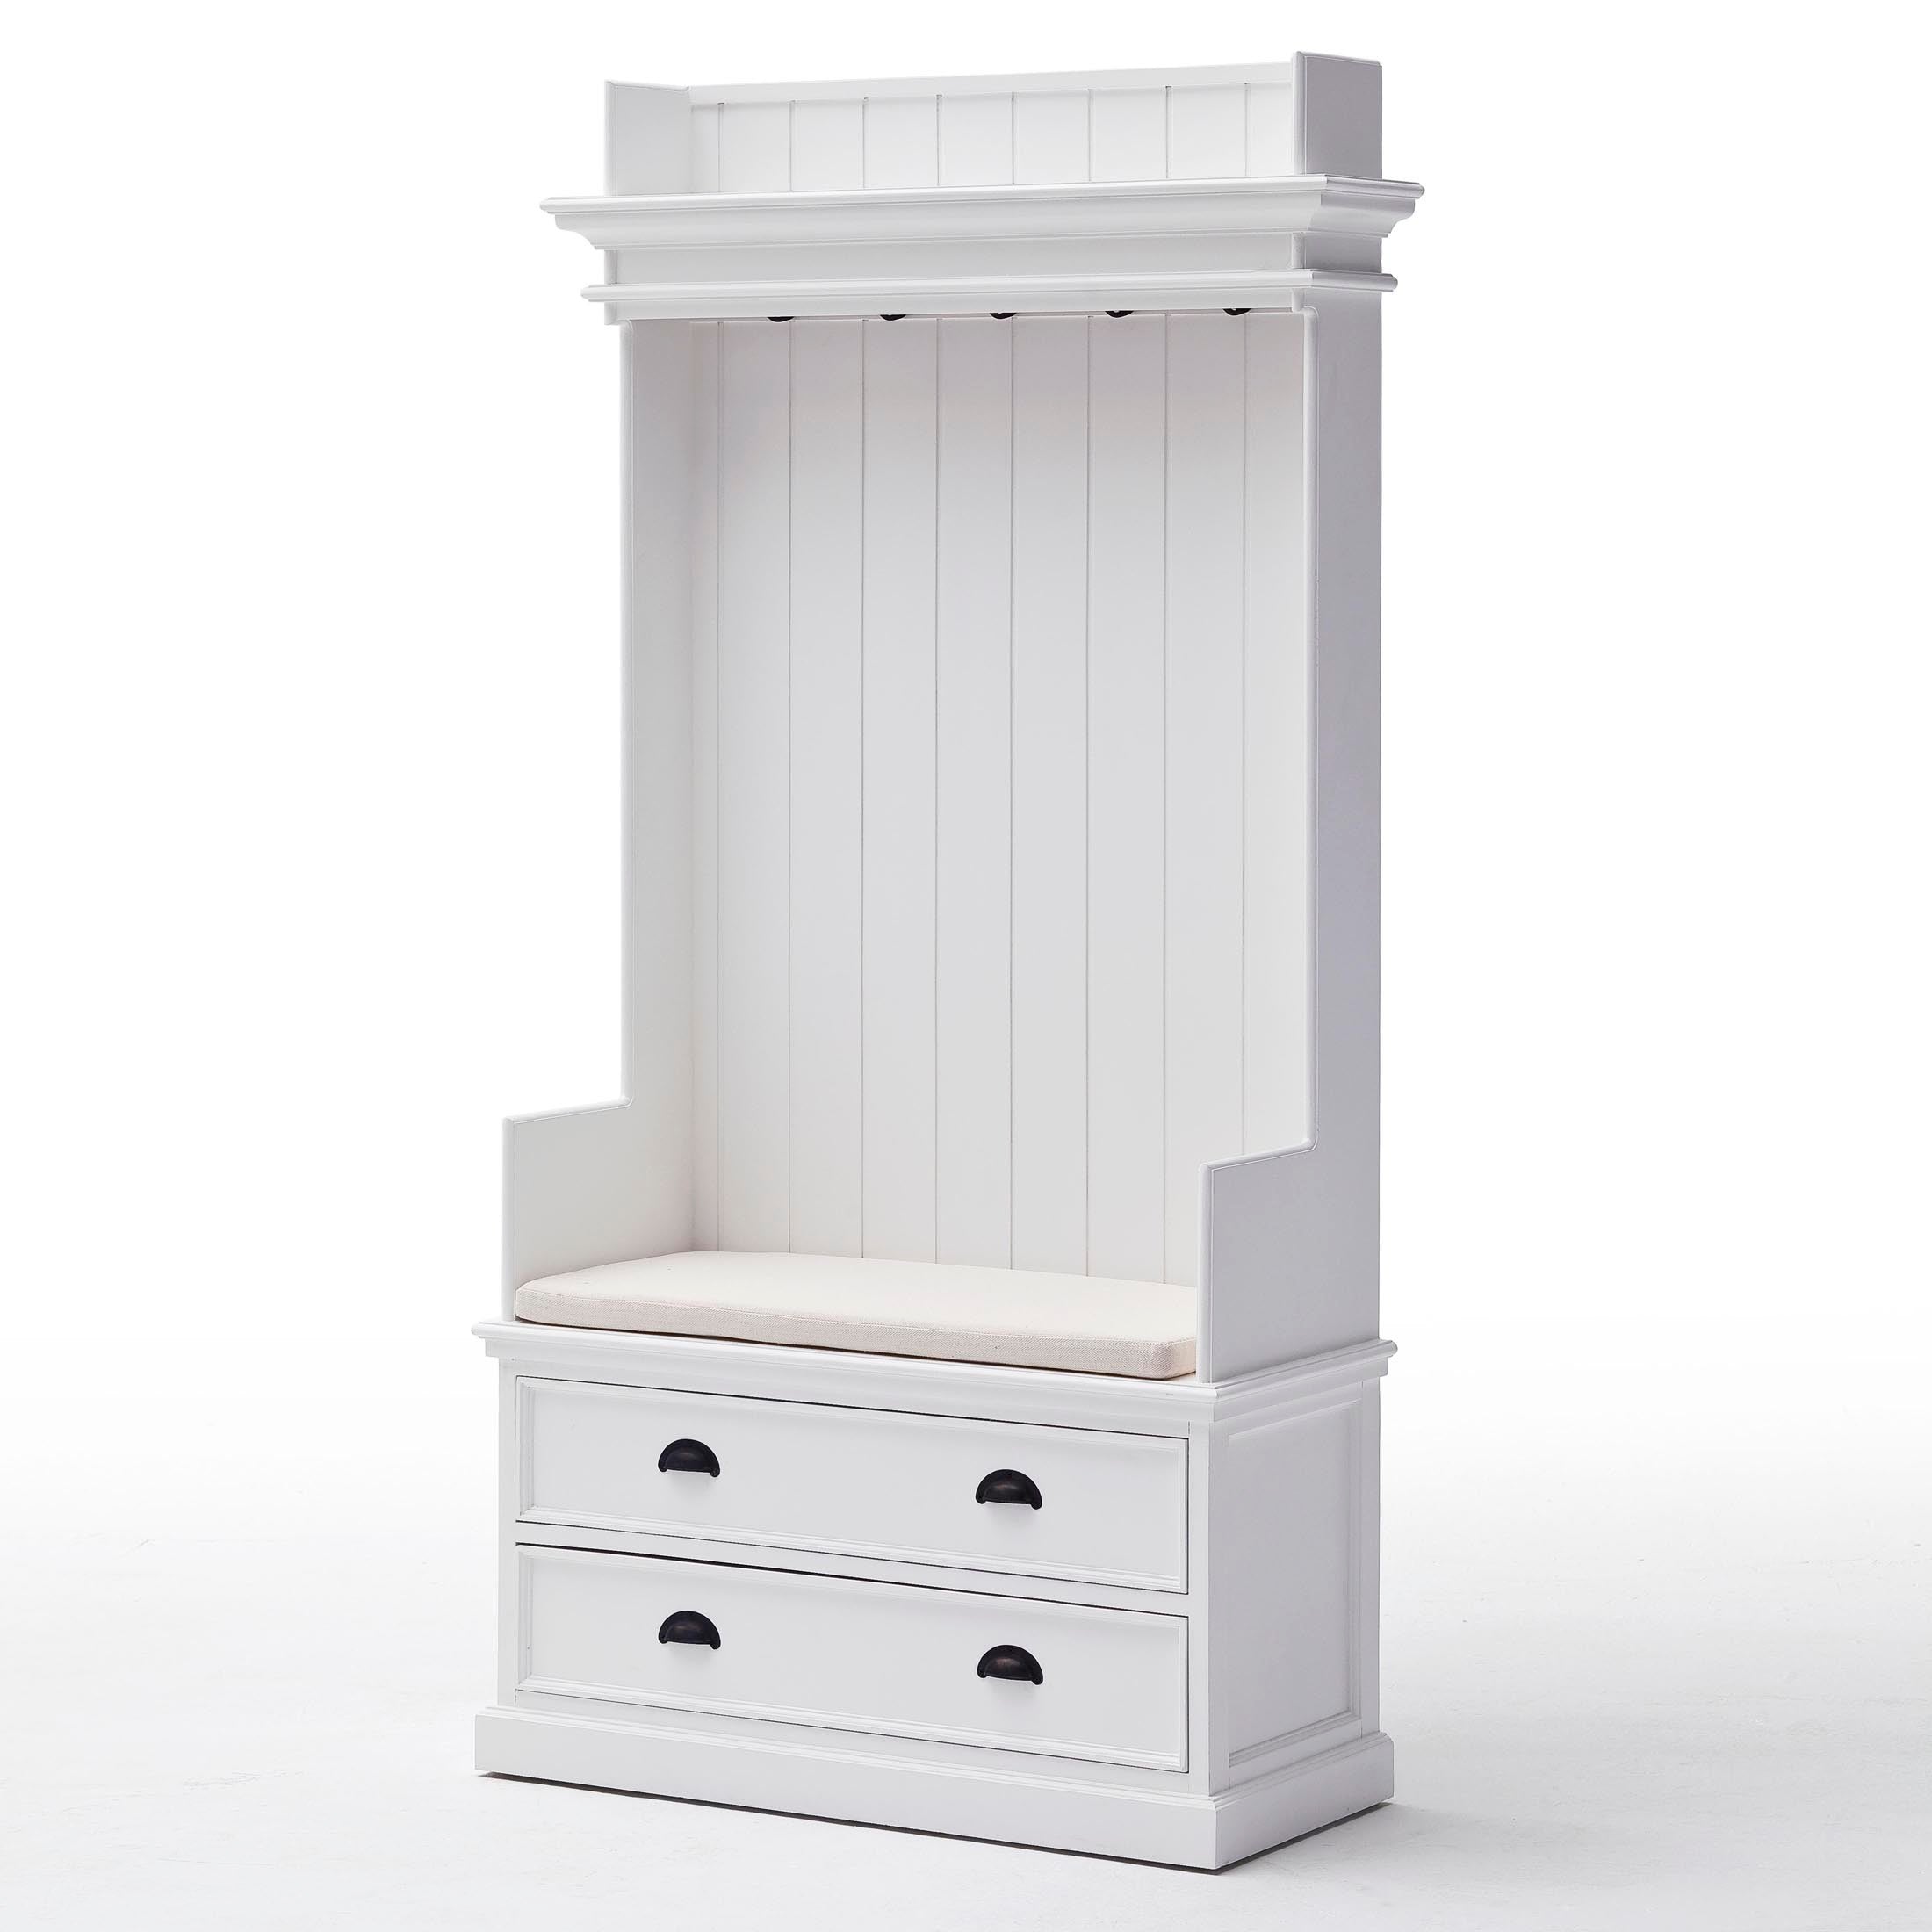 Halifax entrance furniture with drawers